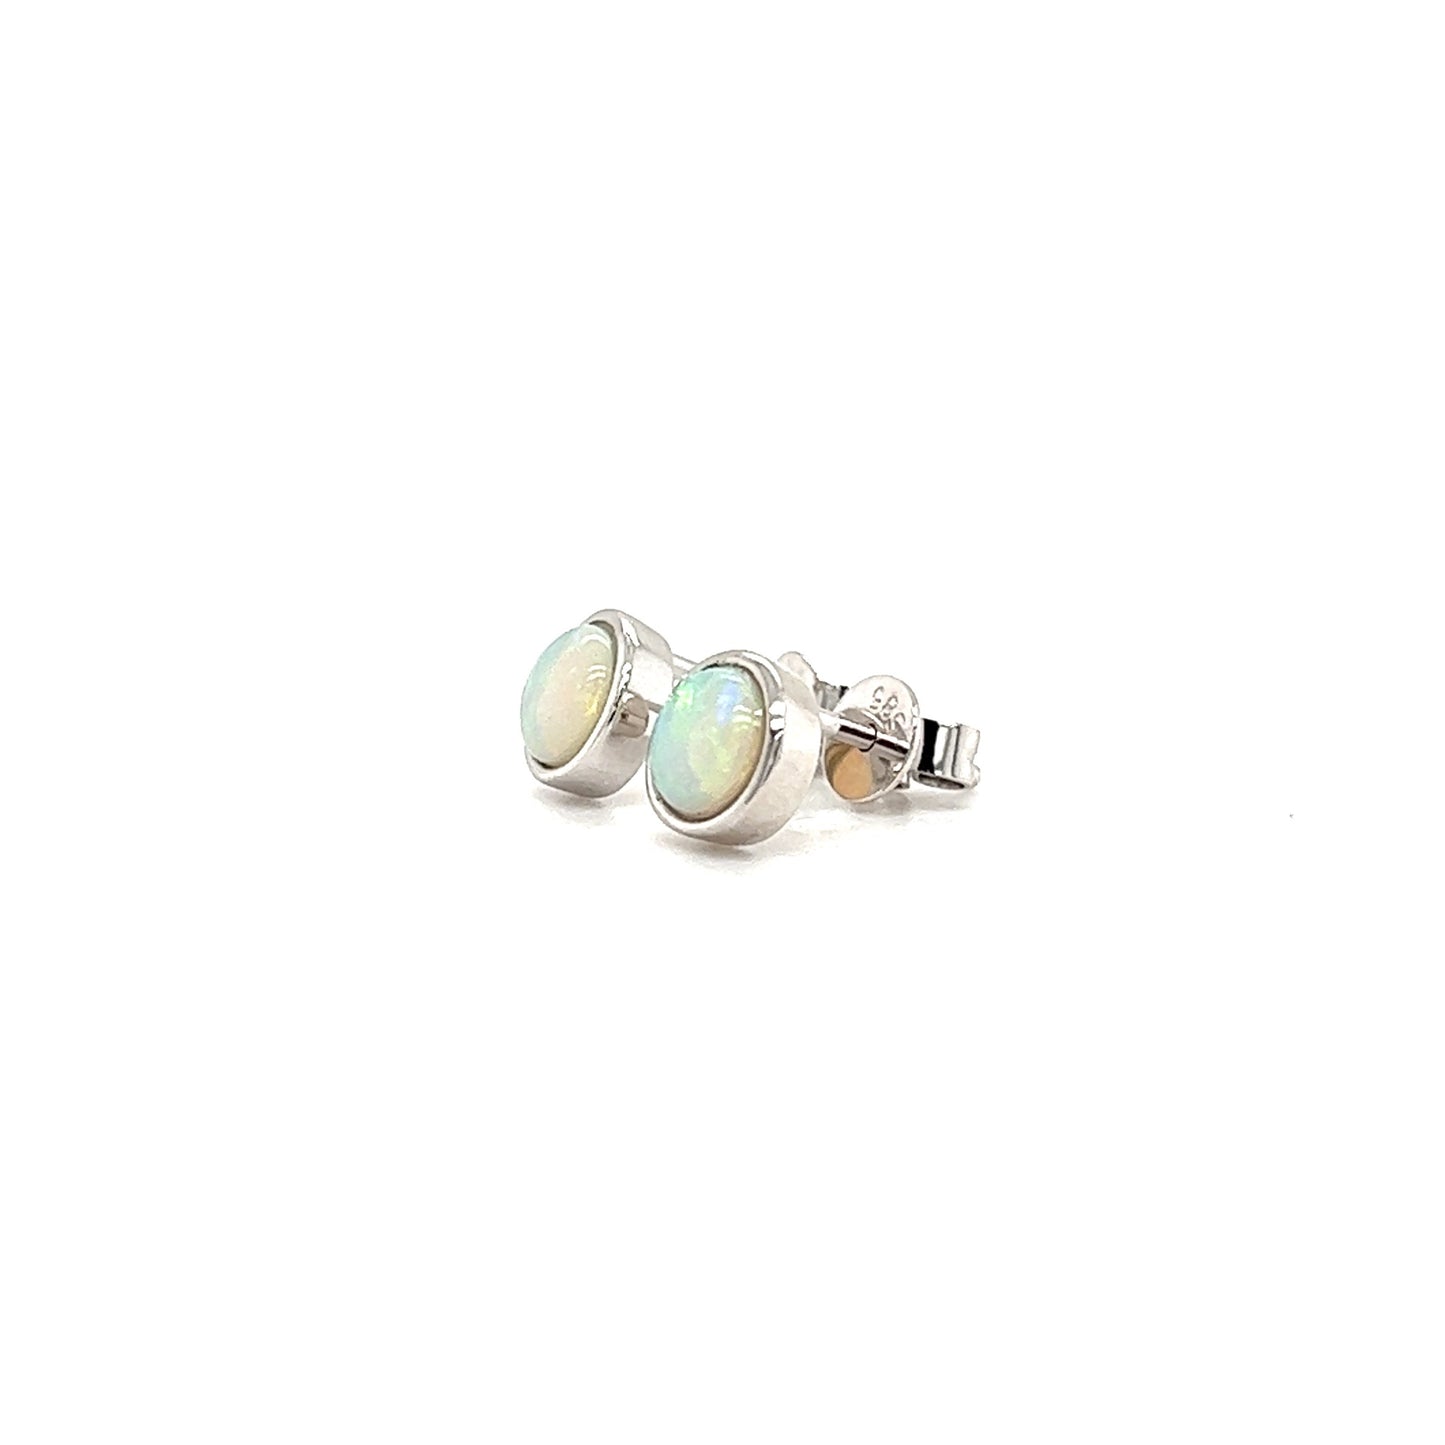 Opal Stud Earrings with 0.66ctw of Opals in 14K White Gold Right Side View